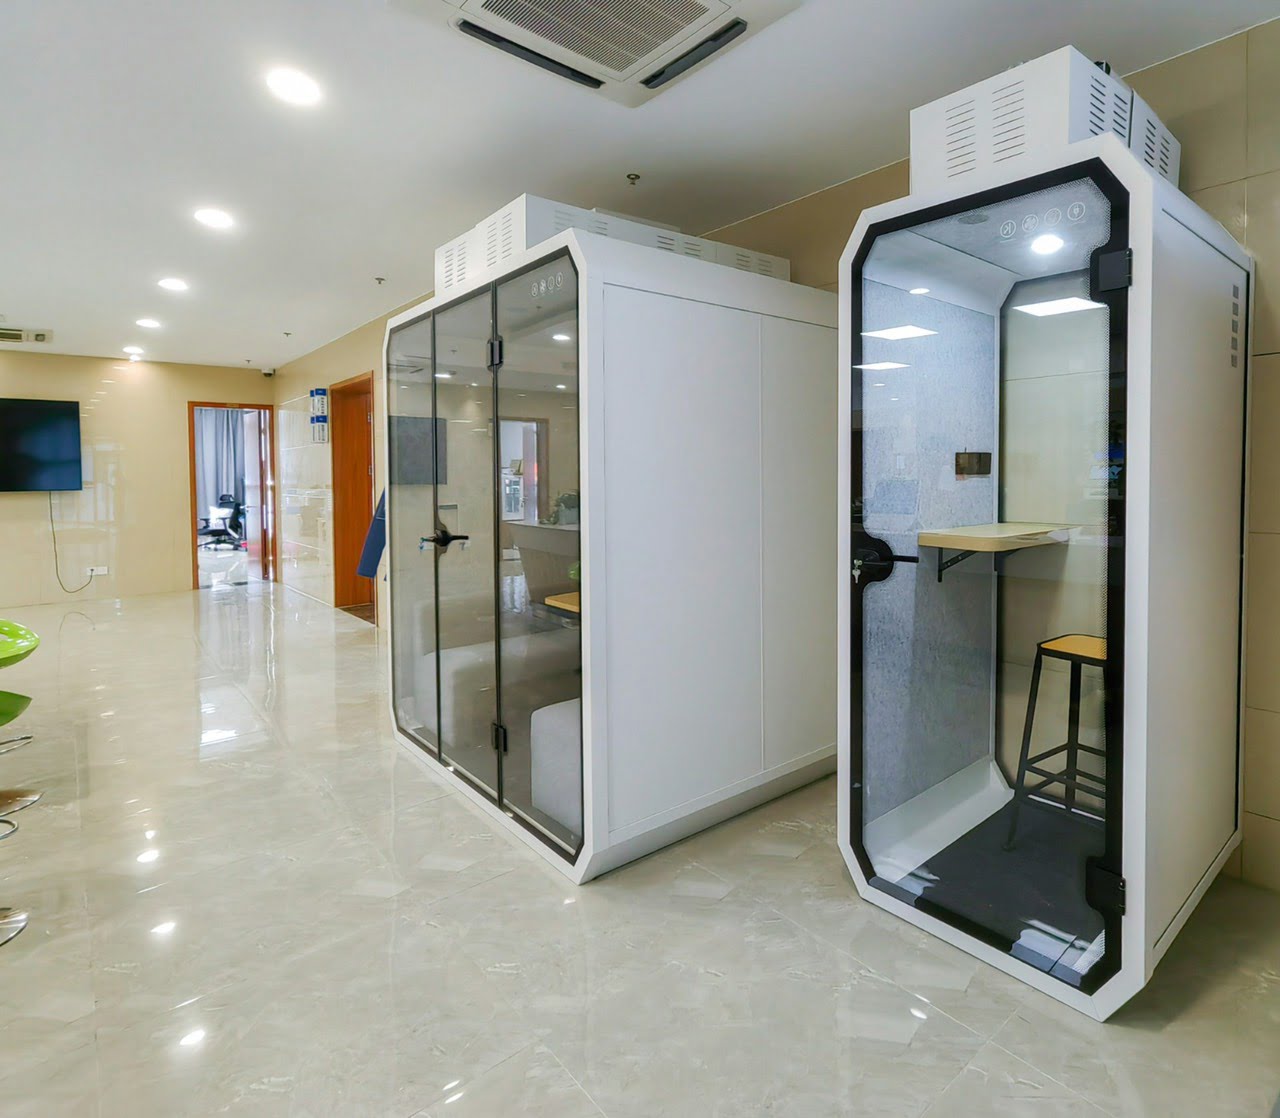 Office Phone Booth - Hotline 091.611.3838